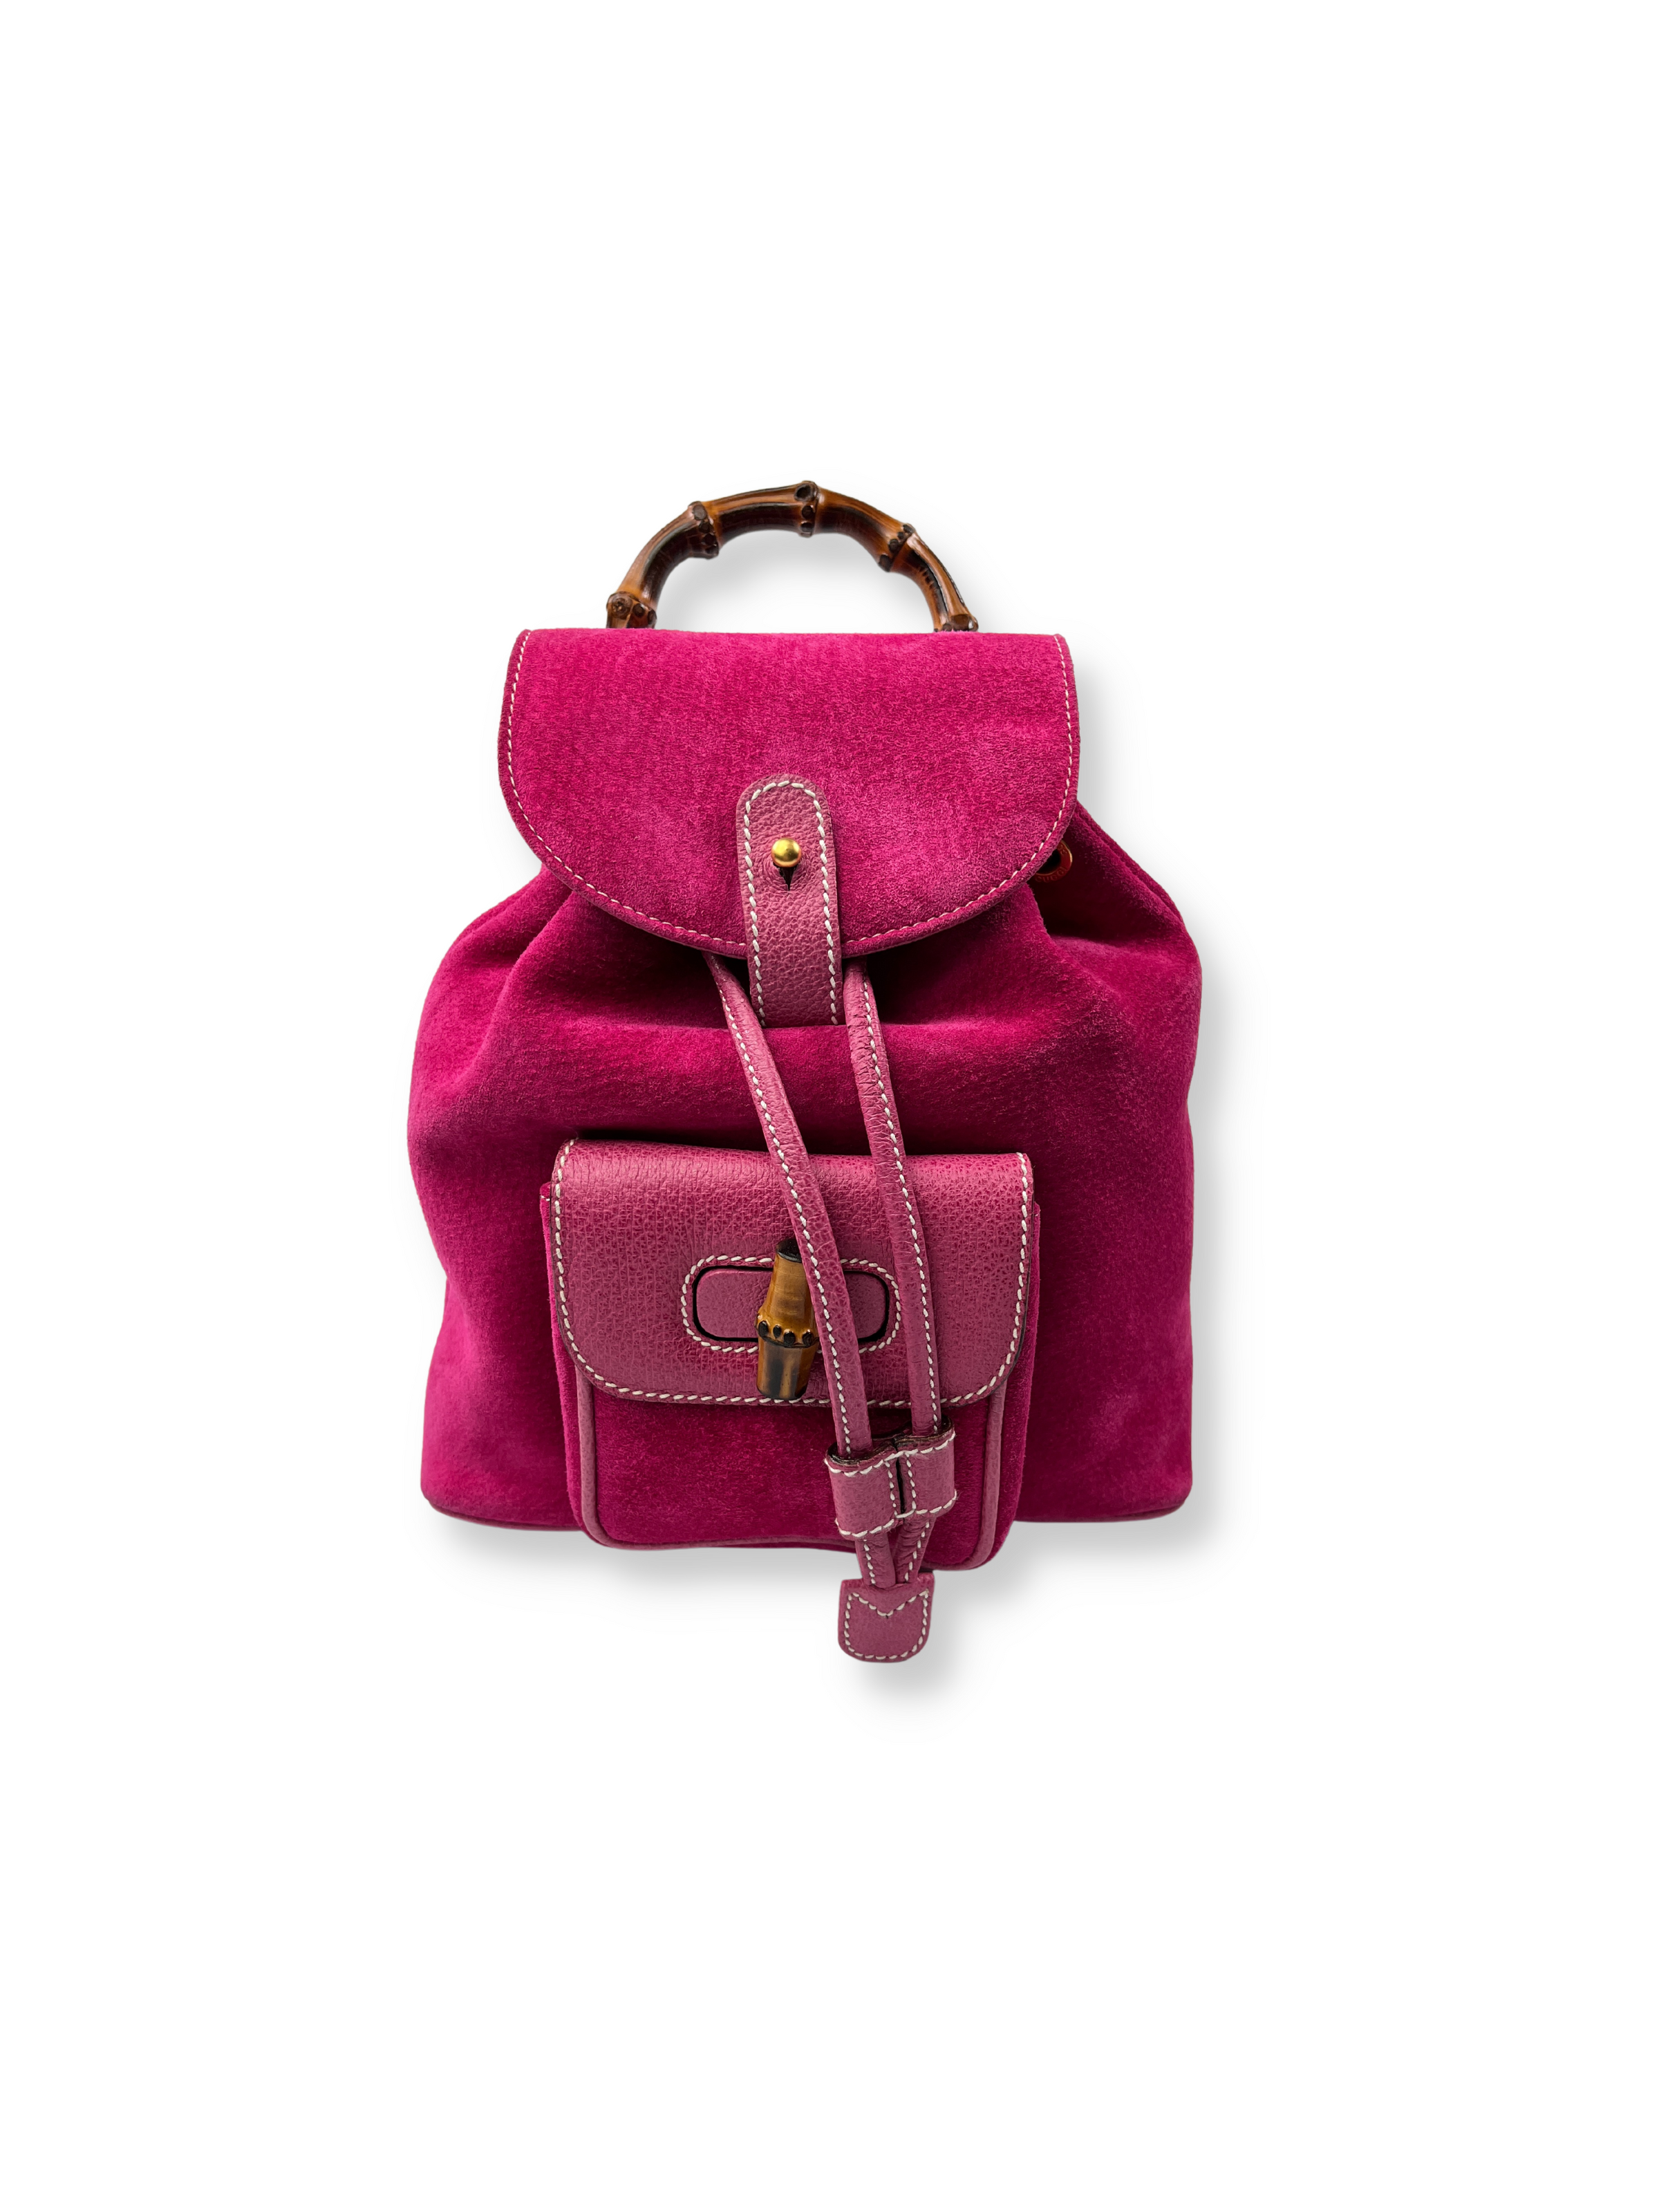 Gucci Pink Suede Leather & Bamboo Mini Backpack 